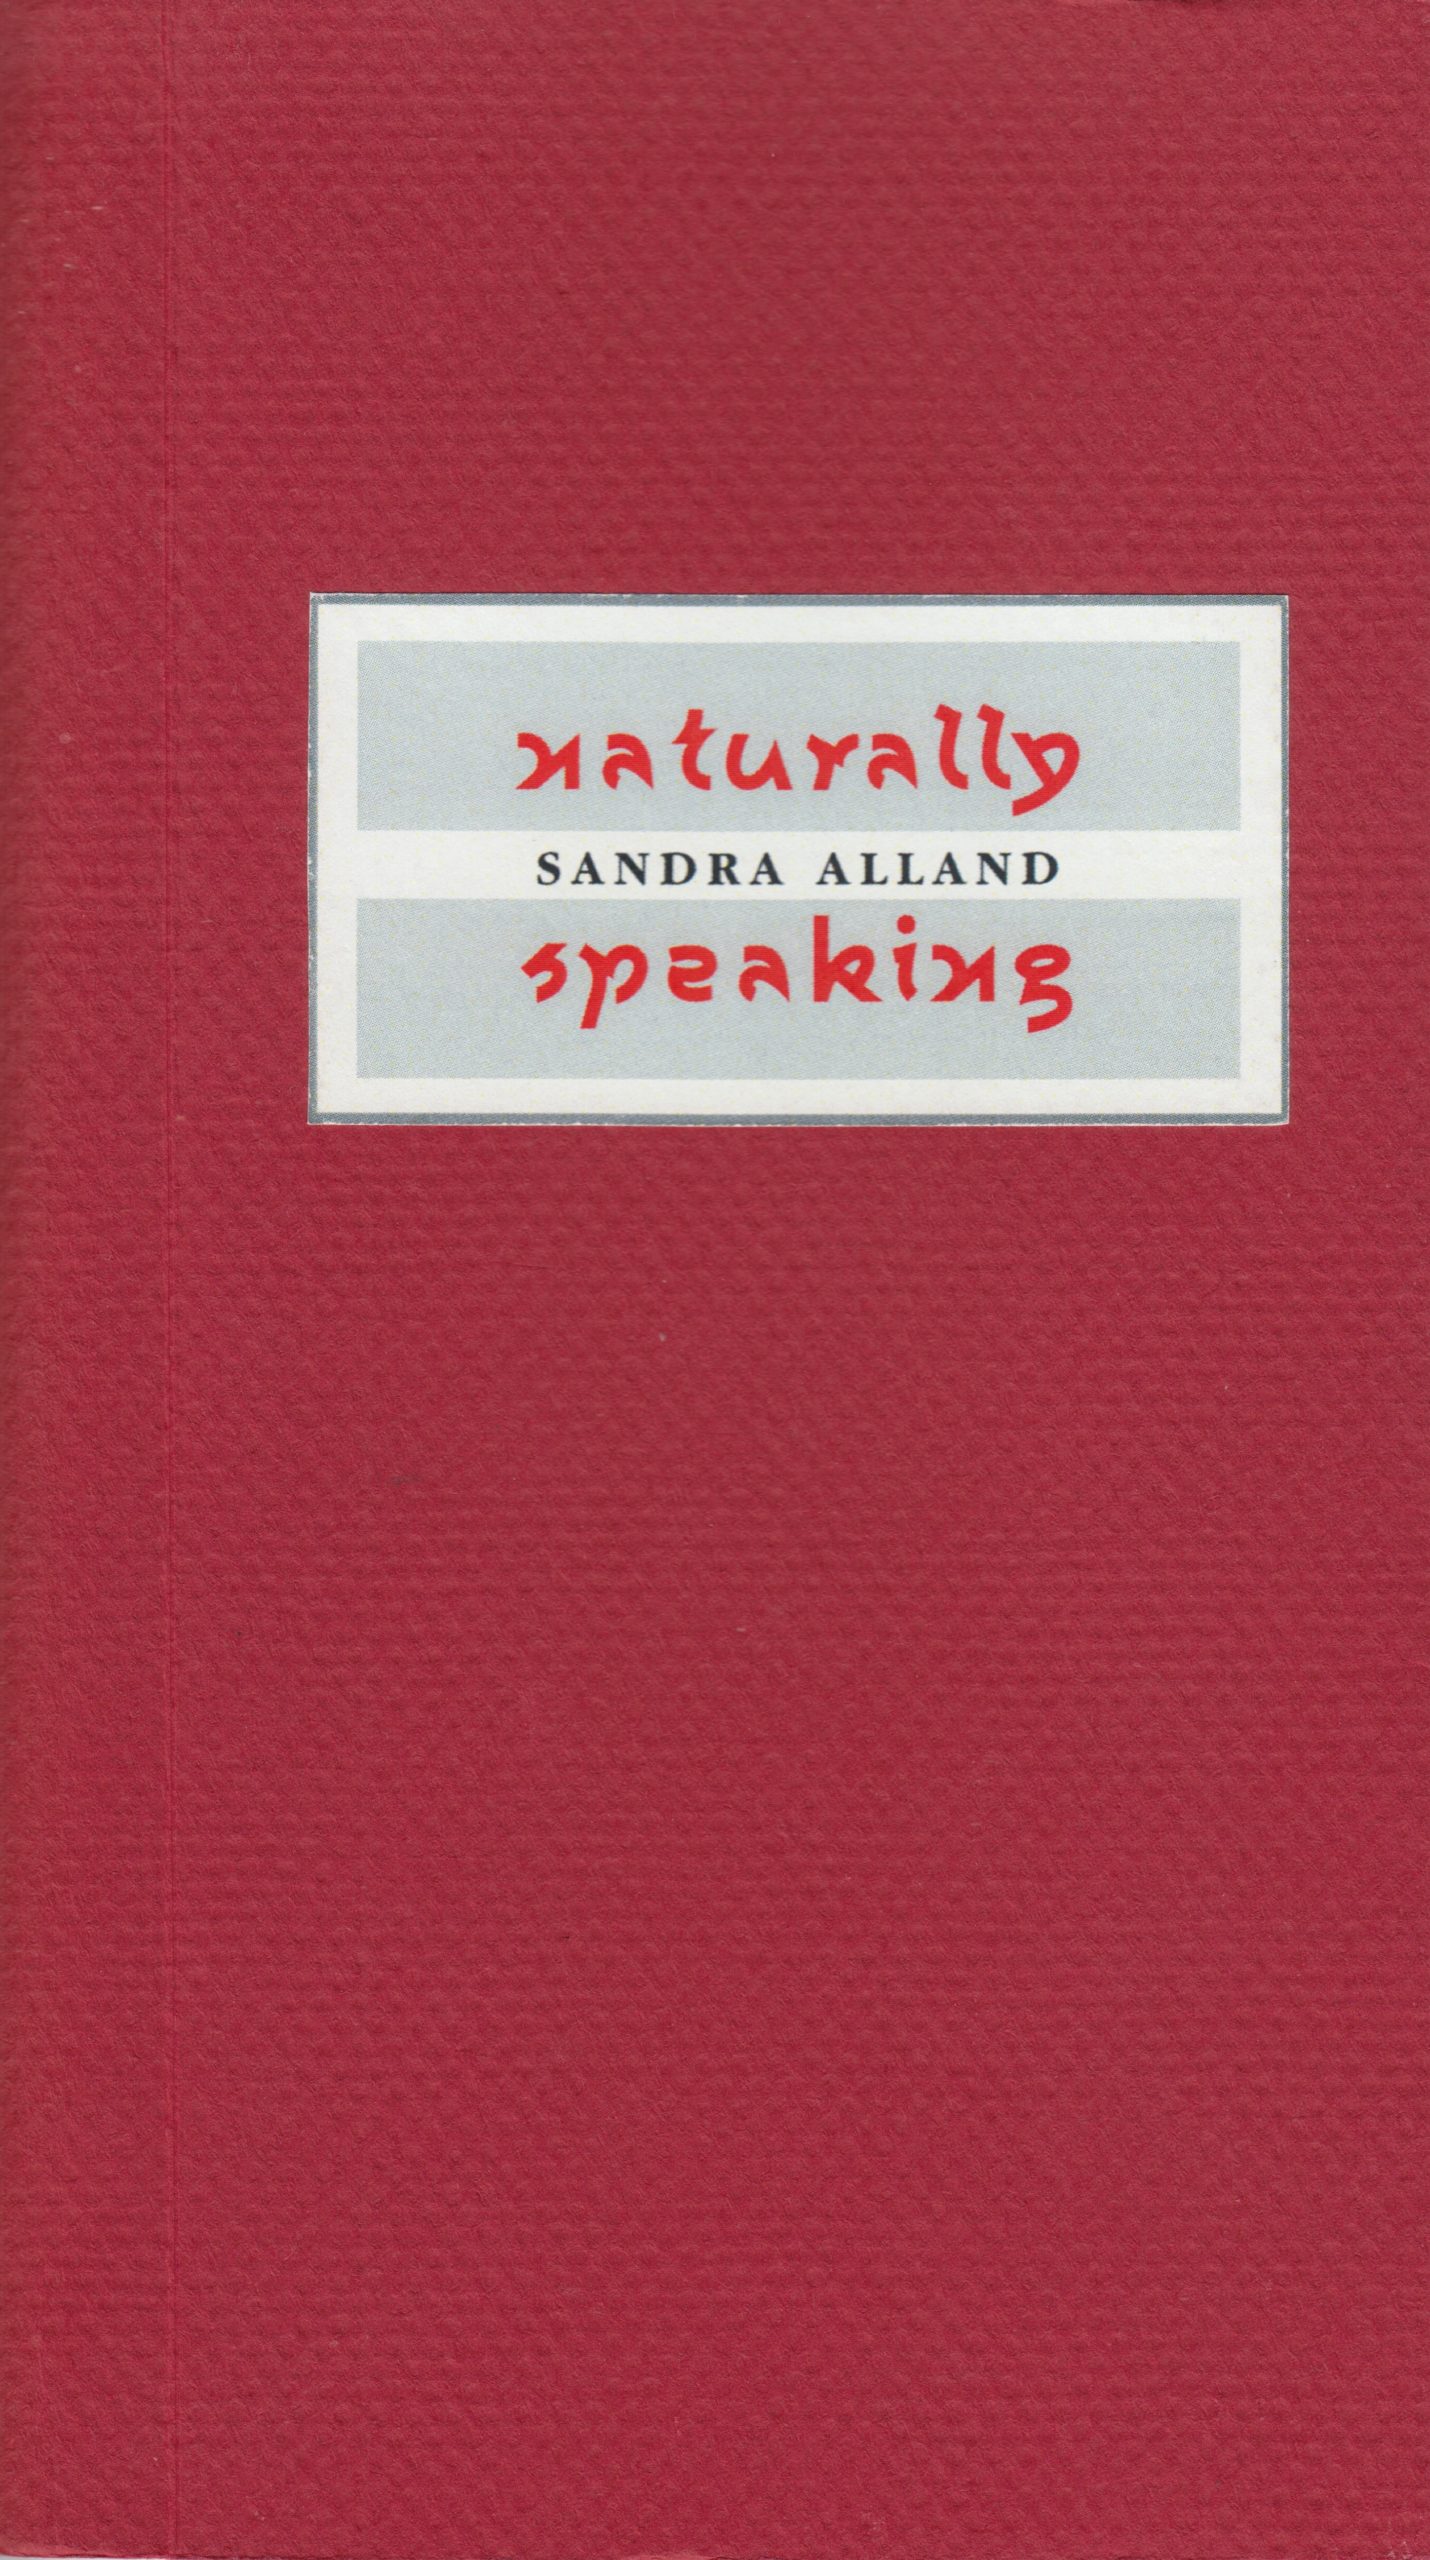 The cover of Naturally Speaking by Sandra Alland. The cover is red, with the title and author name encased in a white-gray frame. The book’s title is in a playful, almost hand-written font, whereas the author’s name is in a standard font.